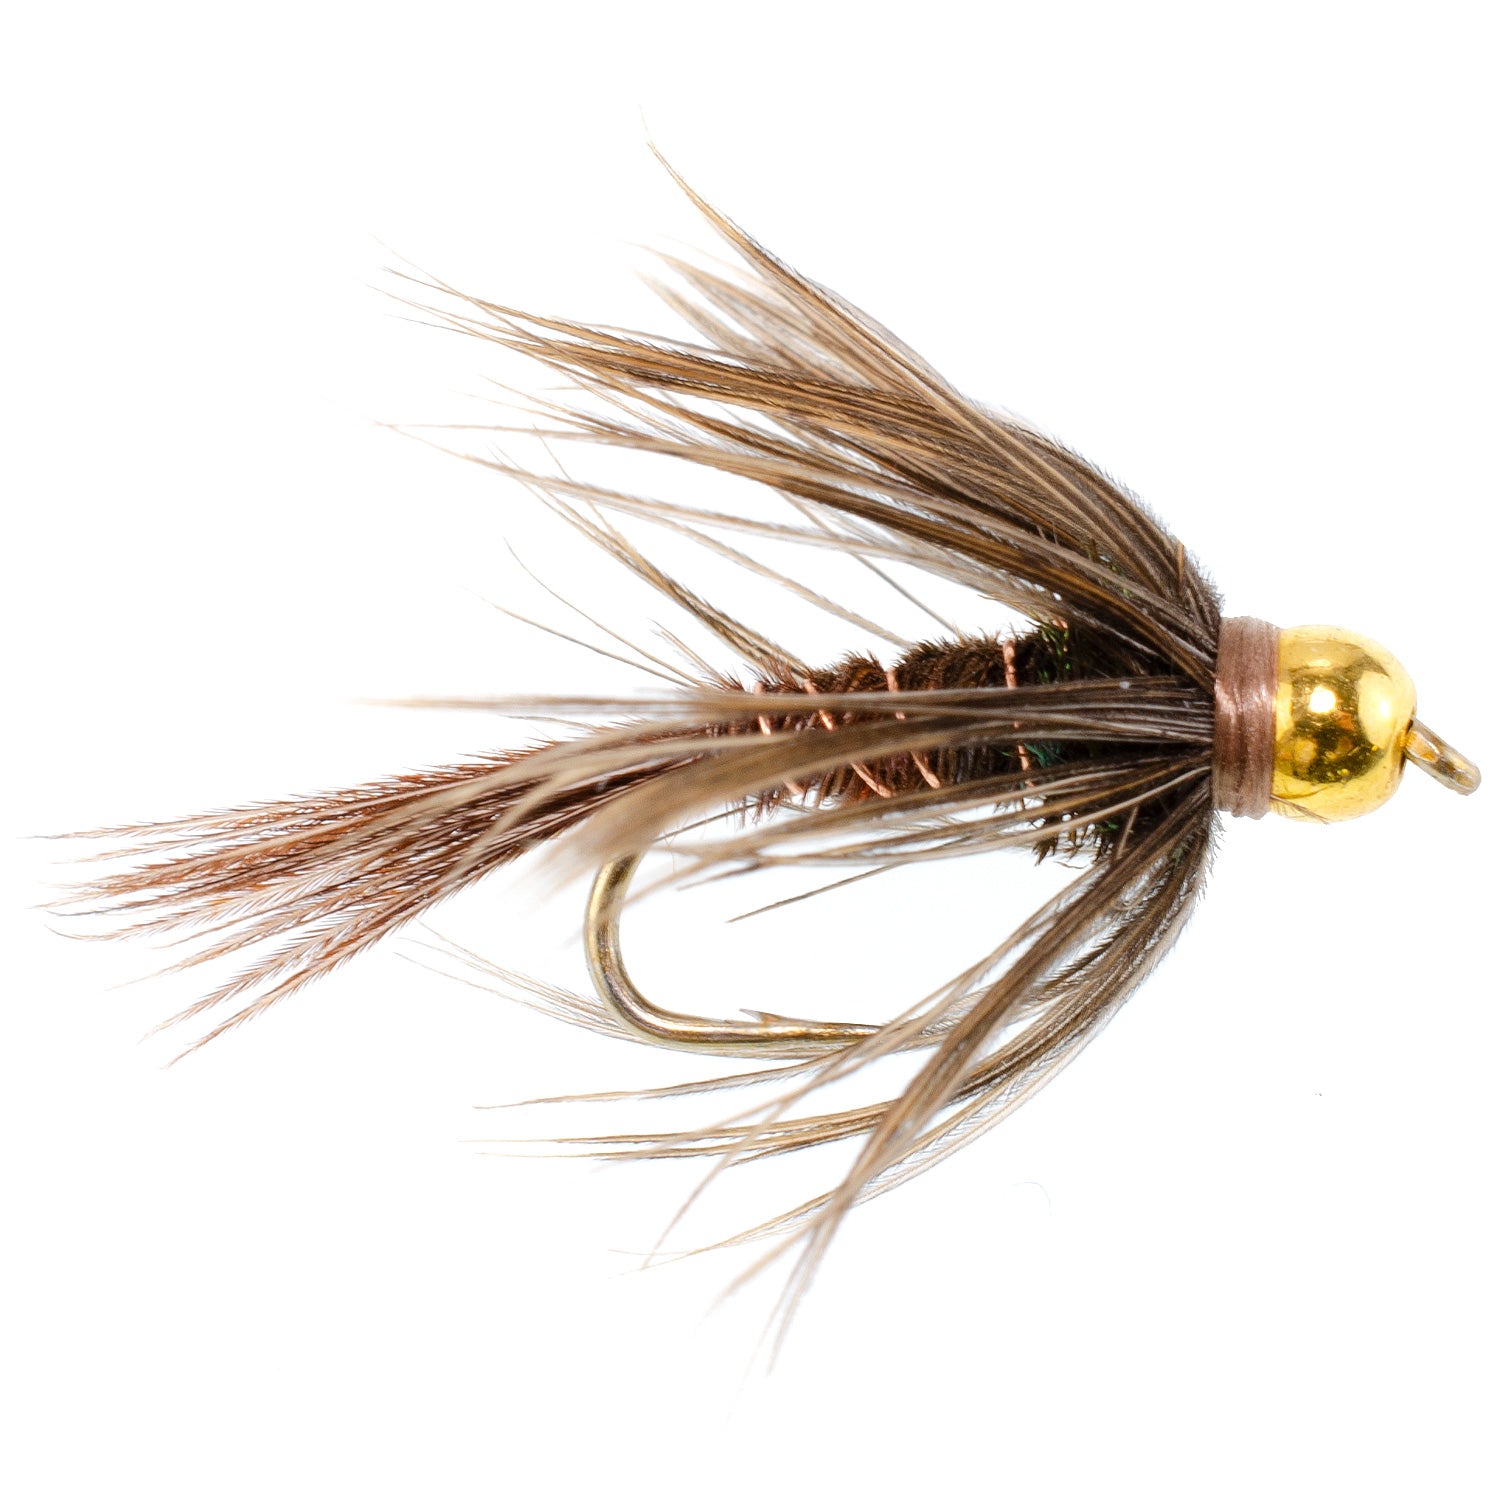 Soft Hackle Bead Head Pheasant Tail Nymph Fly Fishing Flies - 6 Flies Hook Size 12